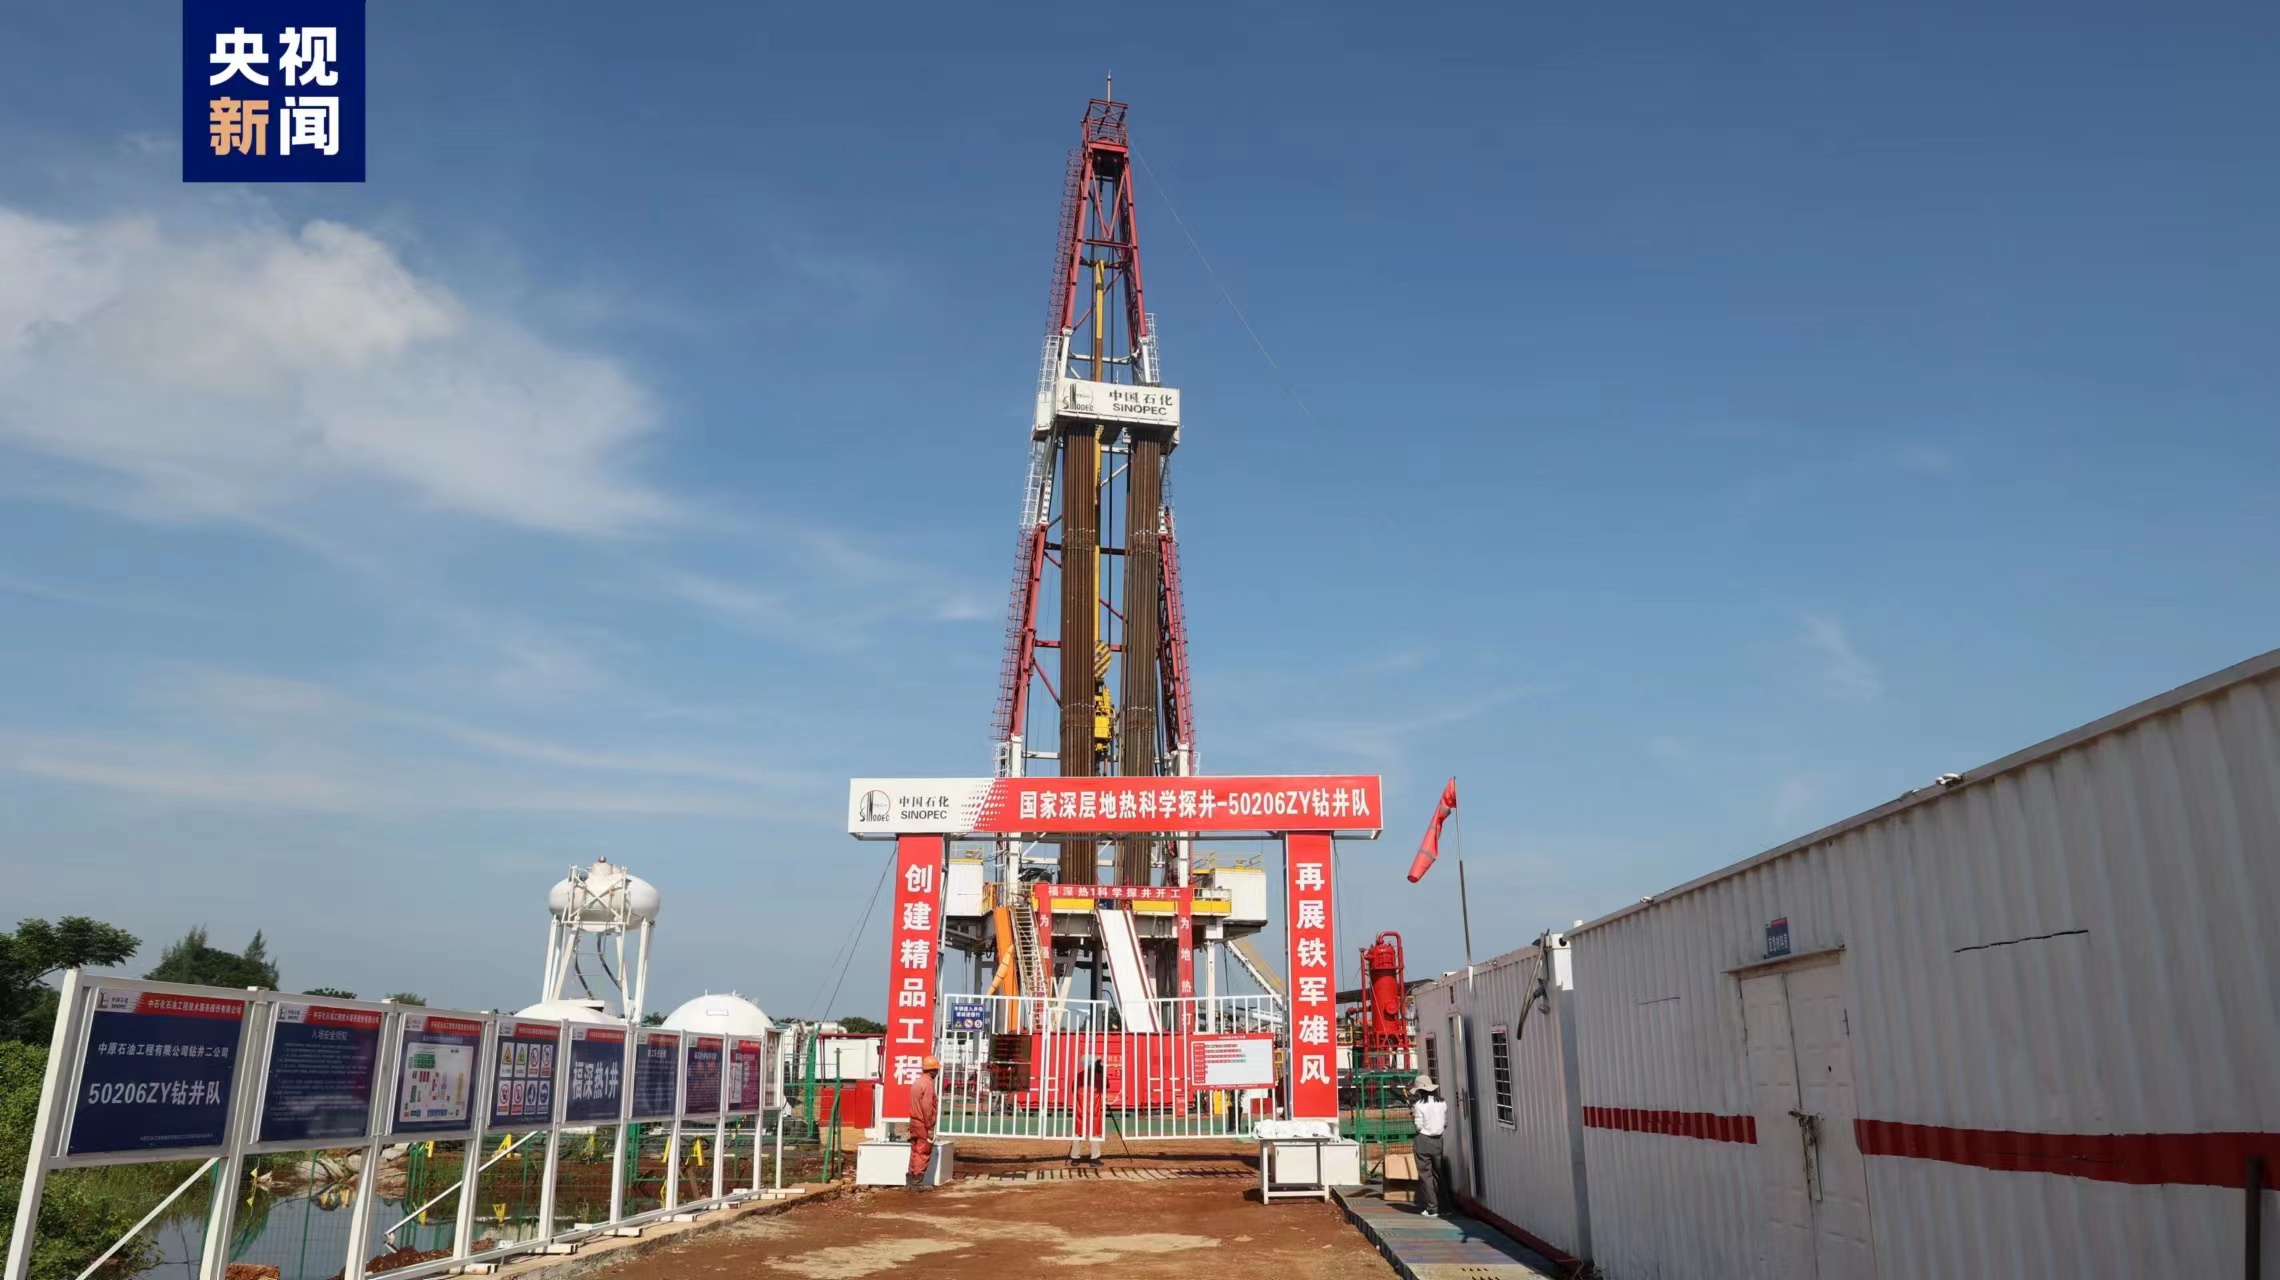 Sinopec starts drilling a geothermal well with about 5,000 meters in Haikou City, south China's Hainan Province. /CMG